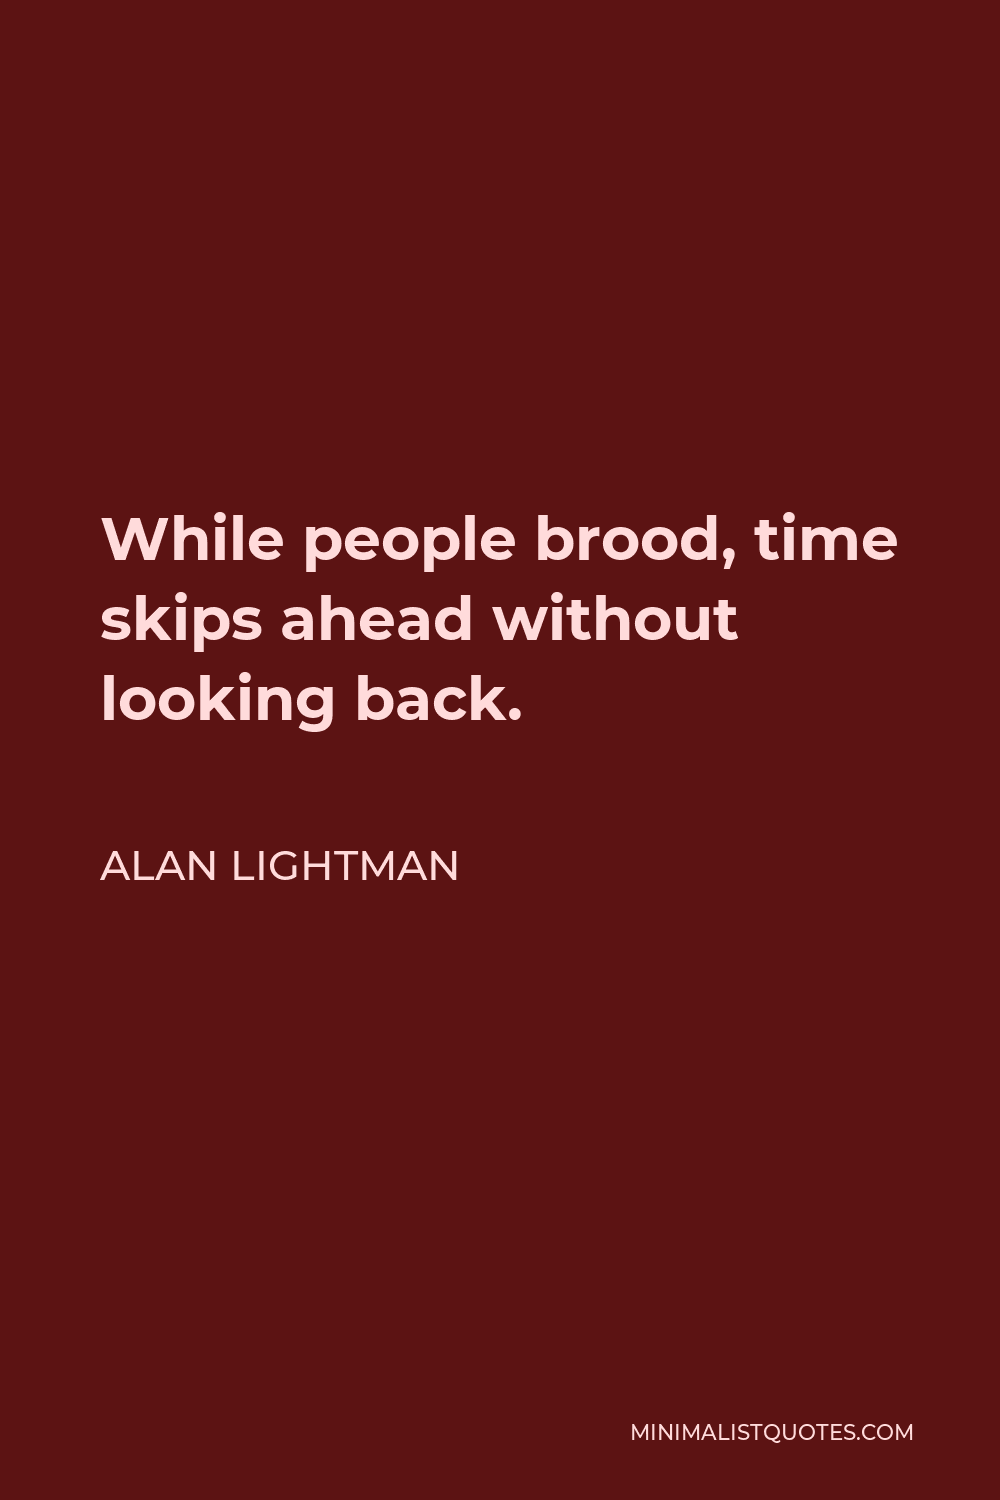 Alan Lightman Quote - While people brood, time skips ahead without looking back.